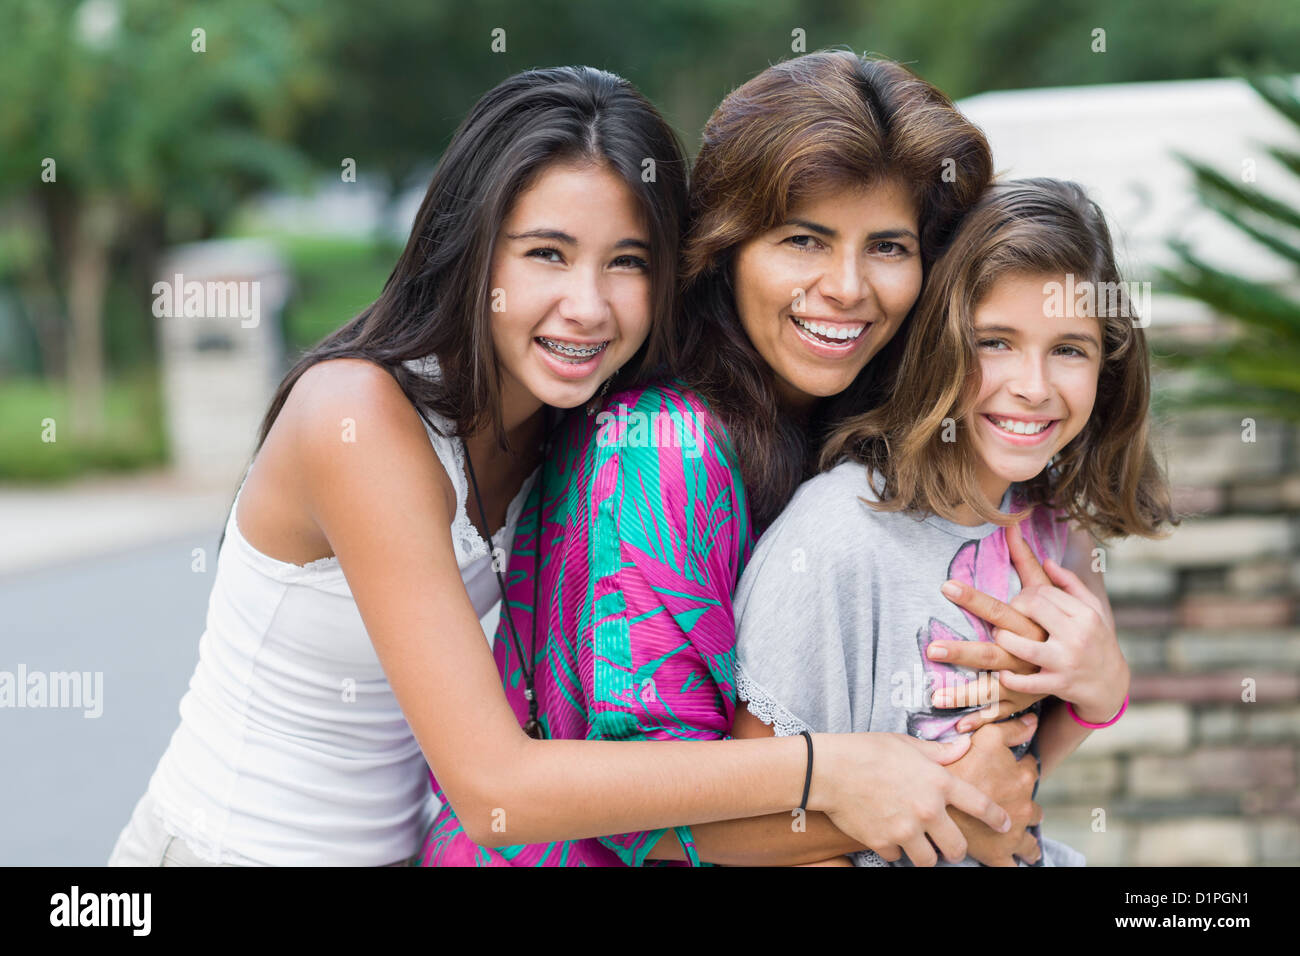 Smiling Hispanic mother and daughters Stock Photo